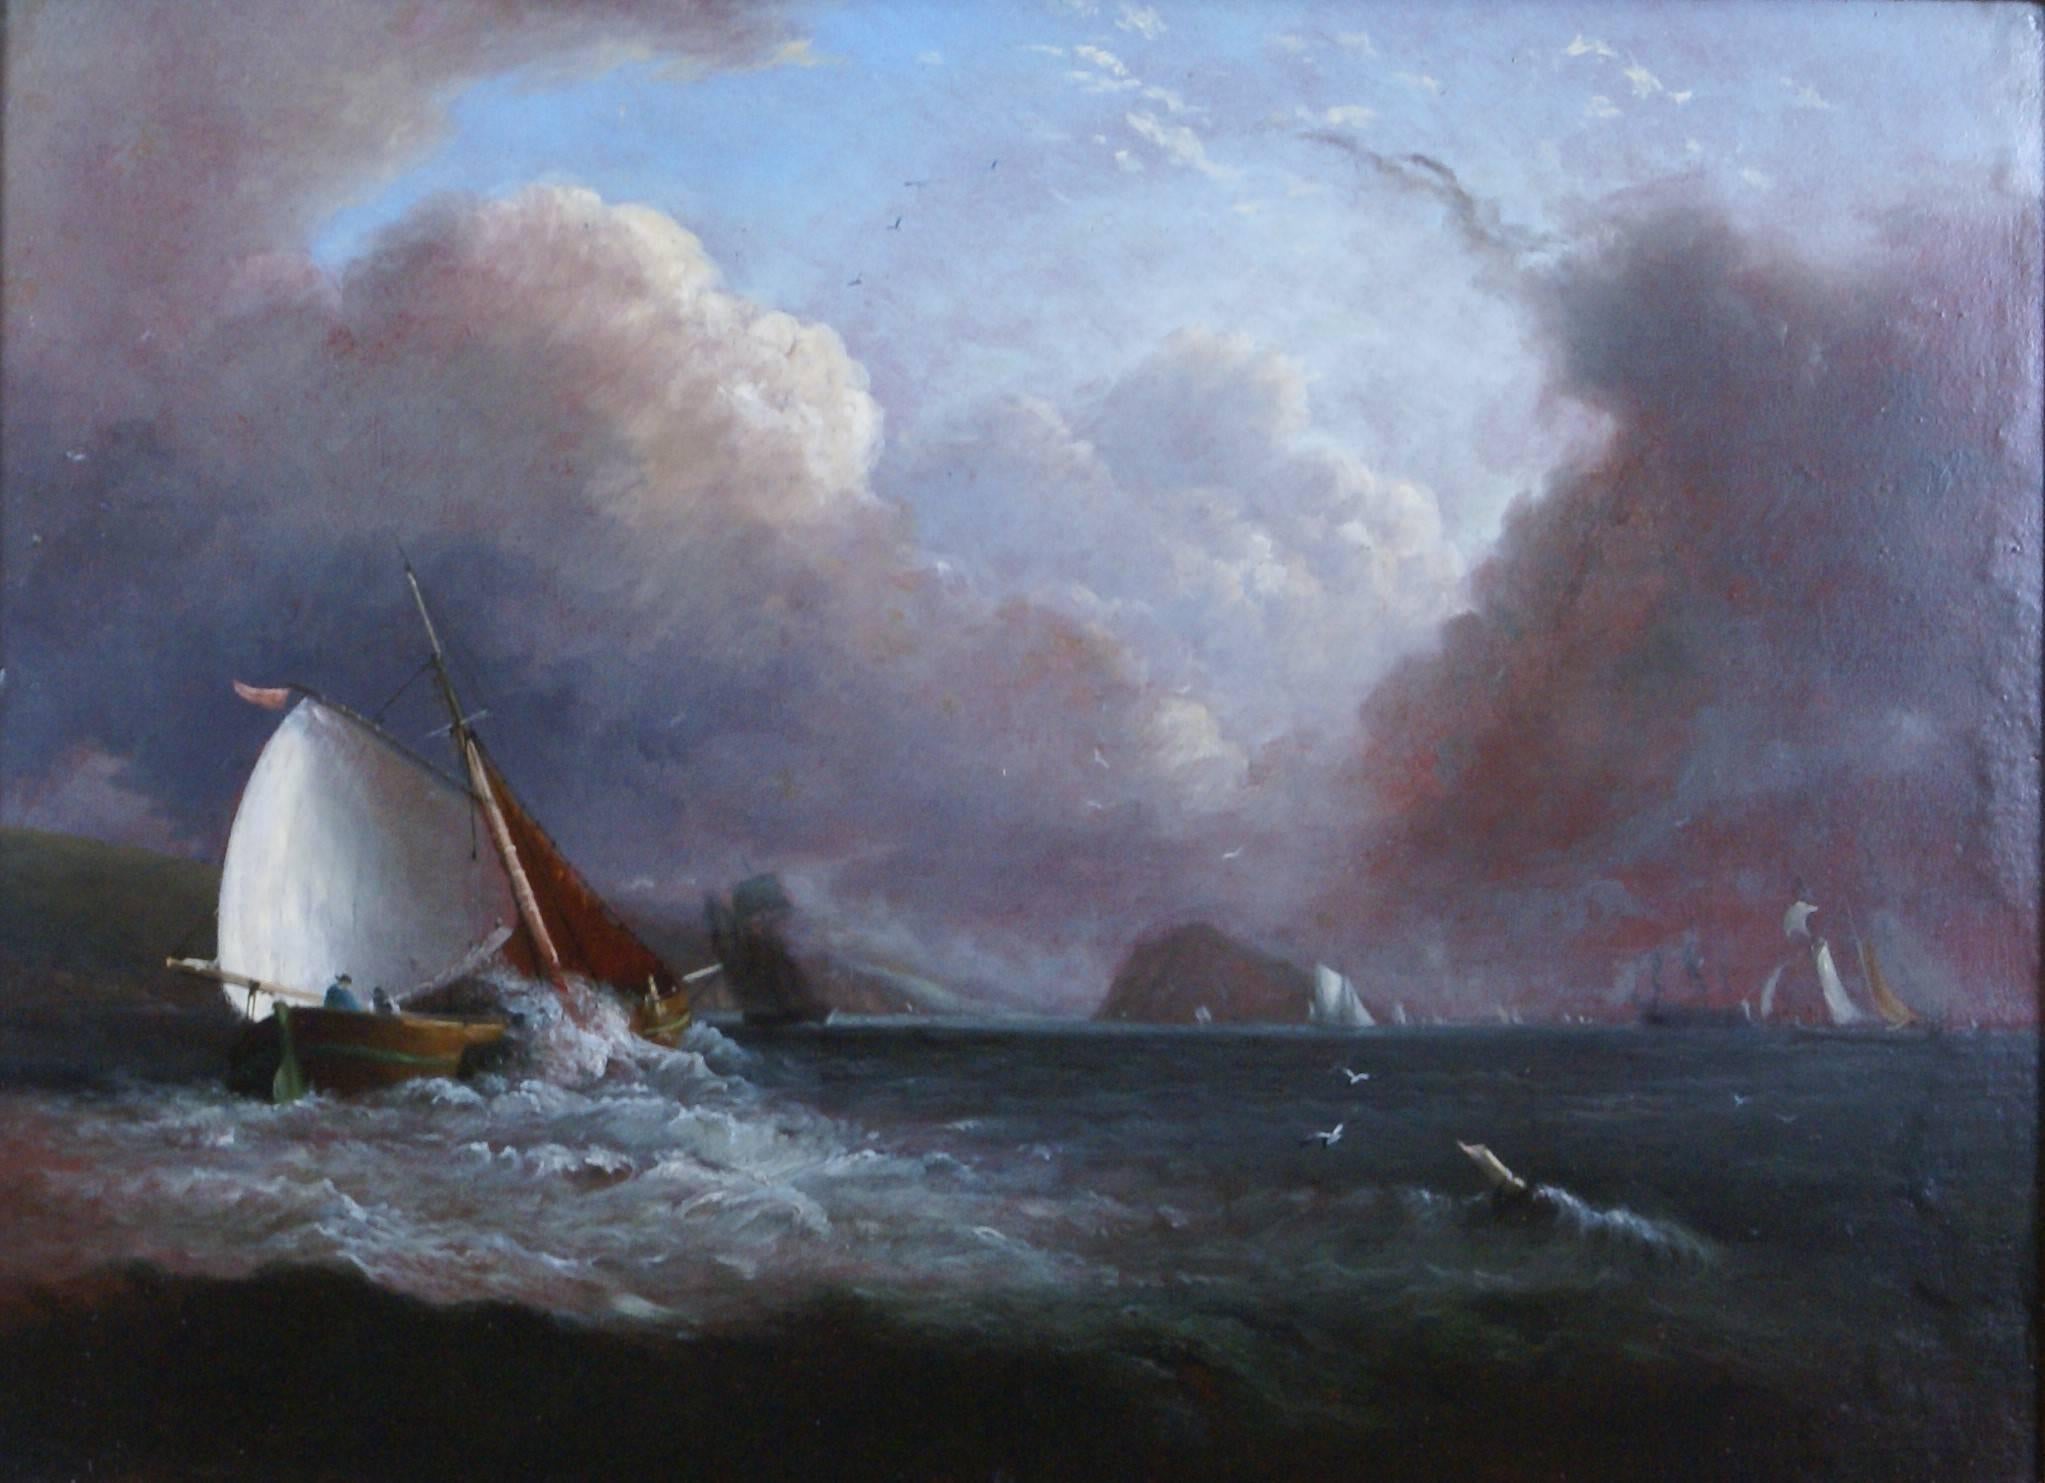 The Mewstone off Plymouth Sound - Painting by Unknown